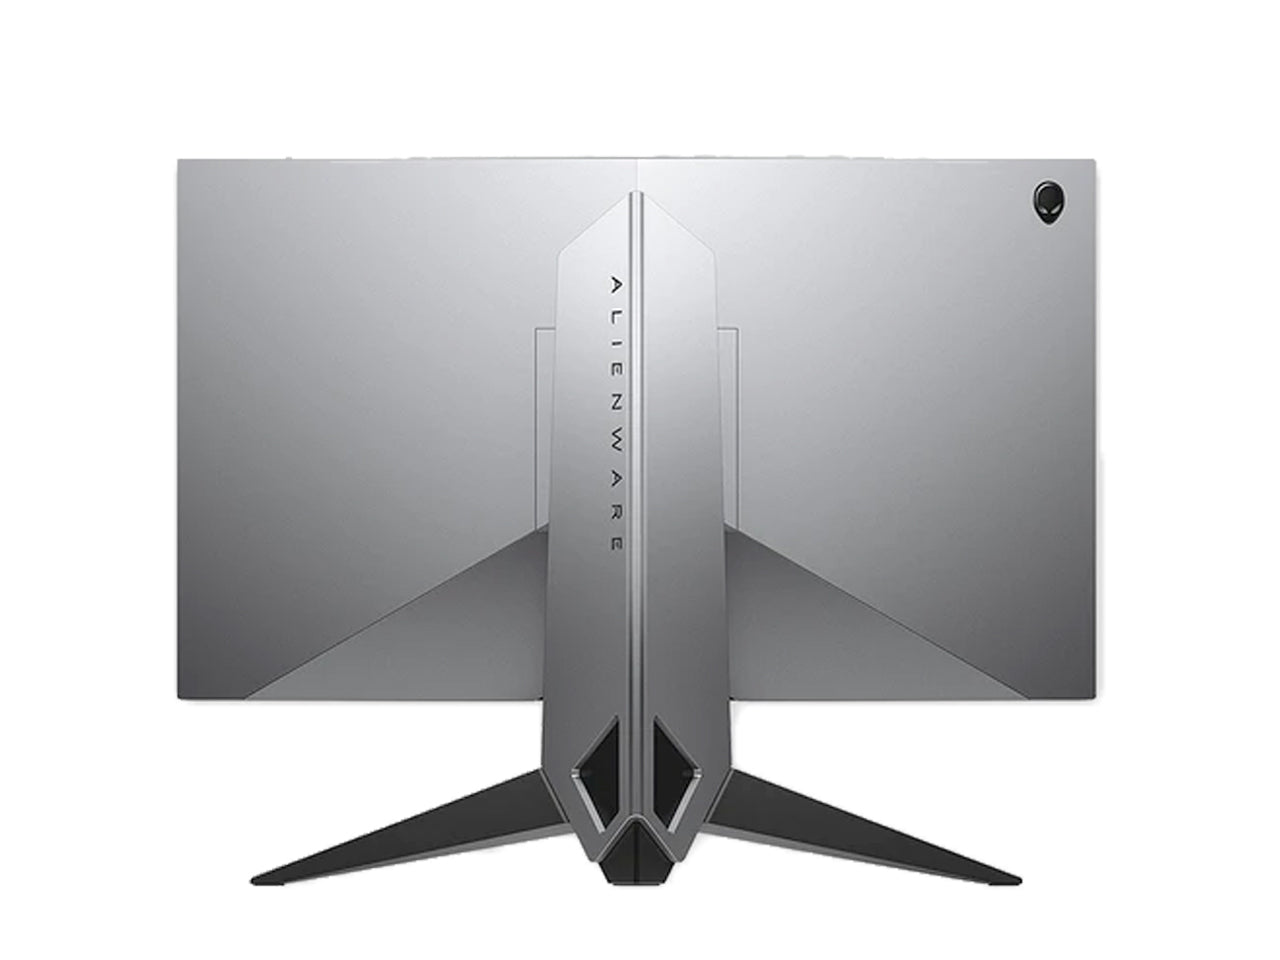 DELL ALIENWARE 25 GAMING MONITOR - AW2518HF